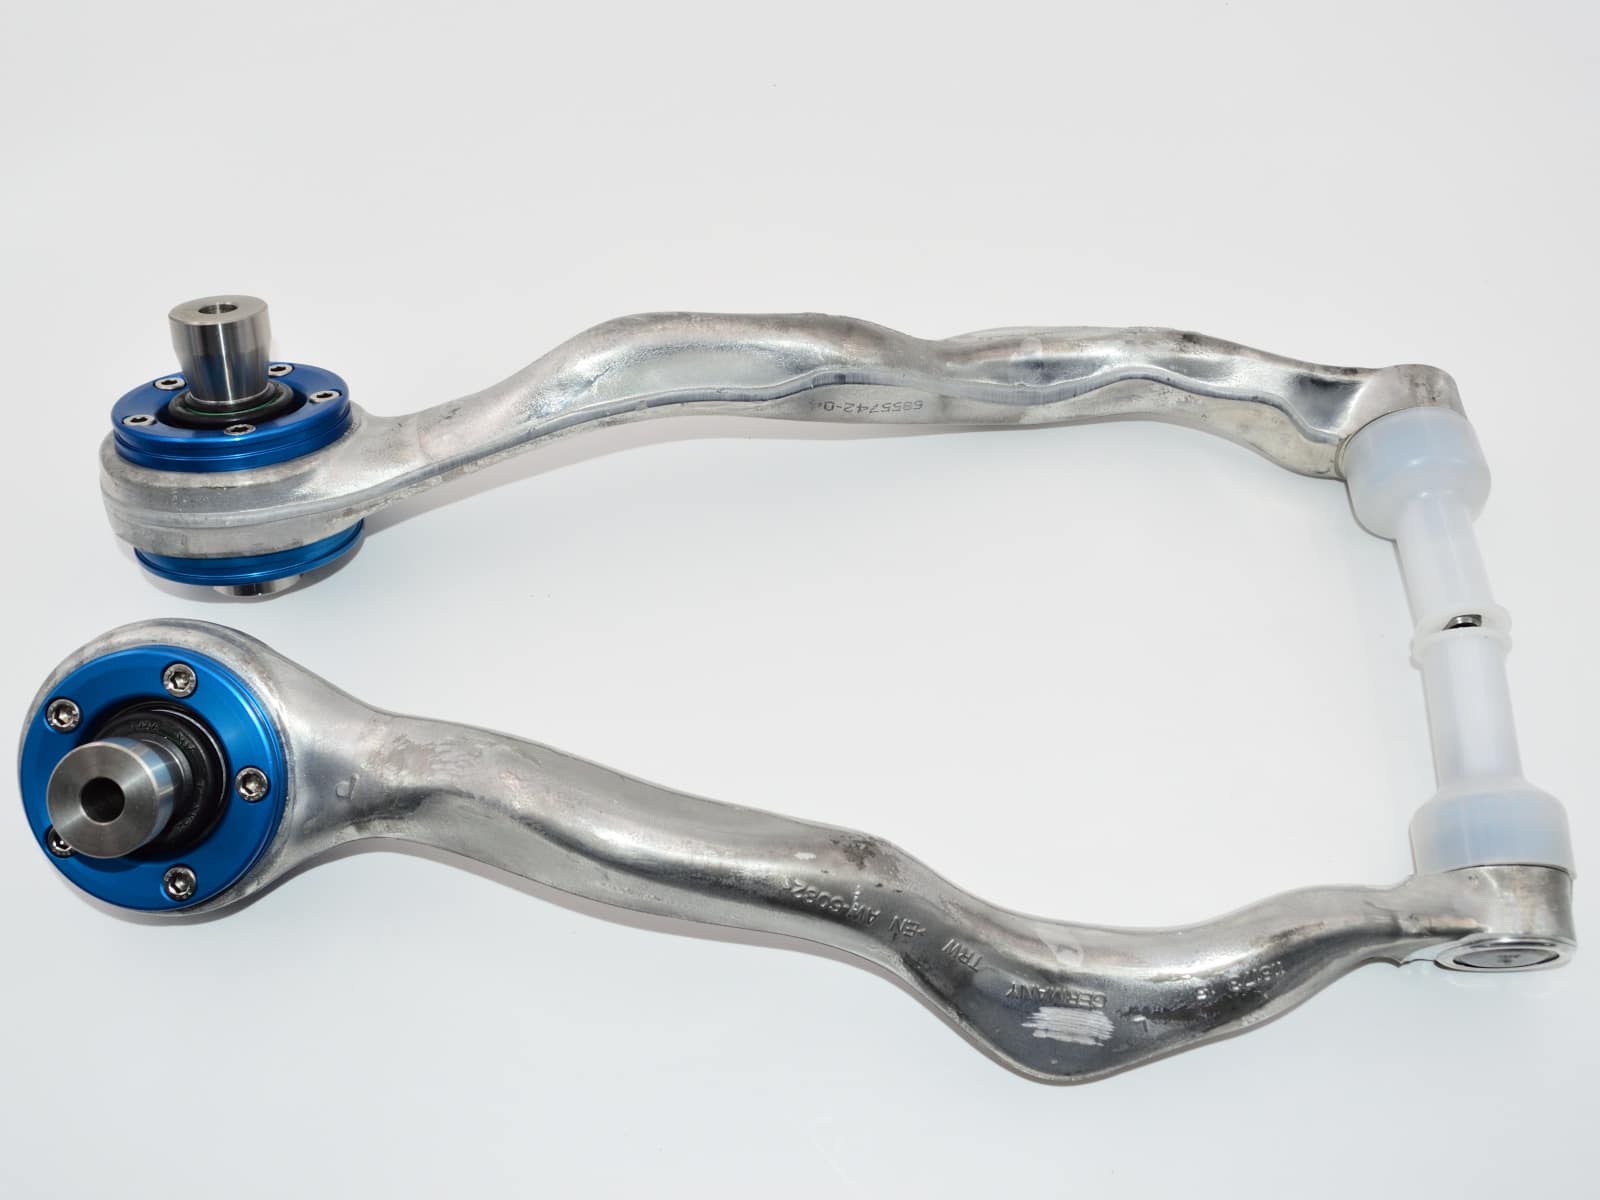 GAS BMW F20-F30 Monoballs Pre-installed into New Control Arms